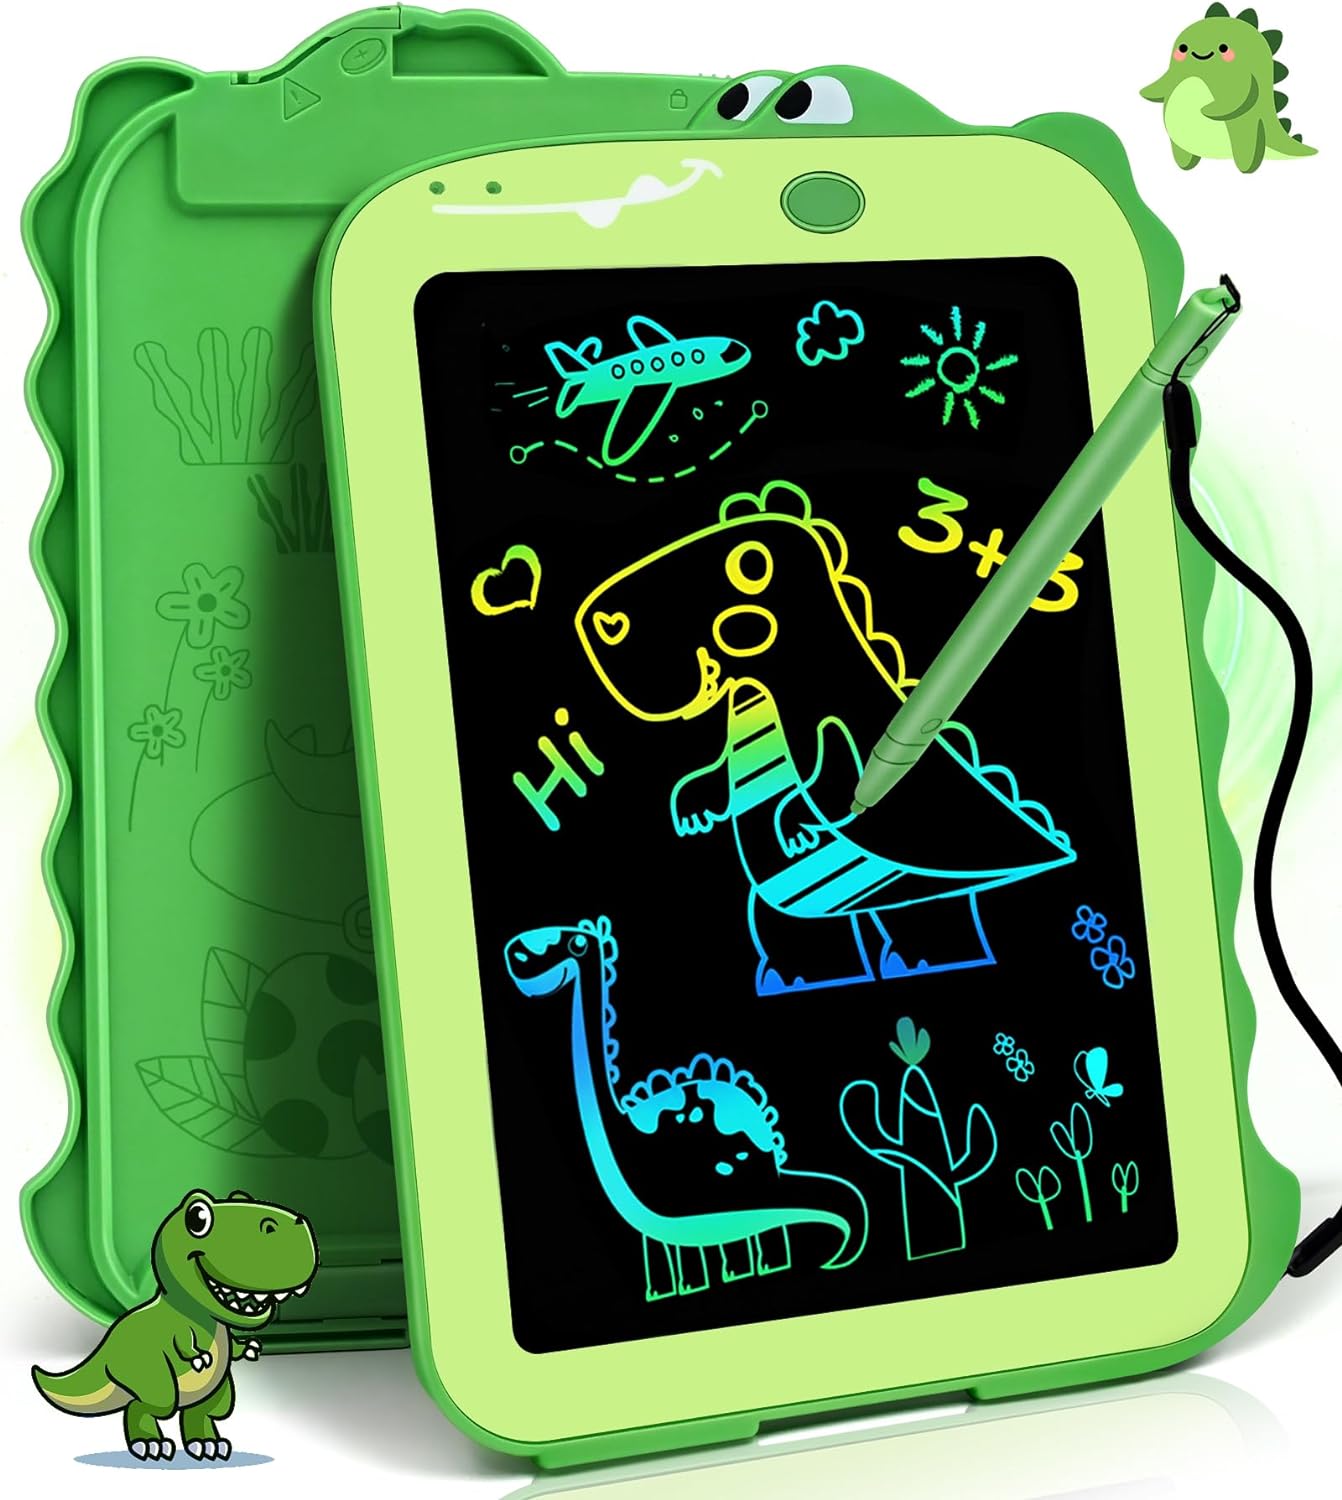 Adorable LCD Writing Tablet for Kids